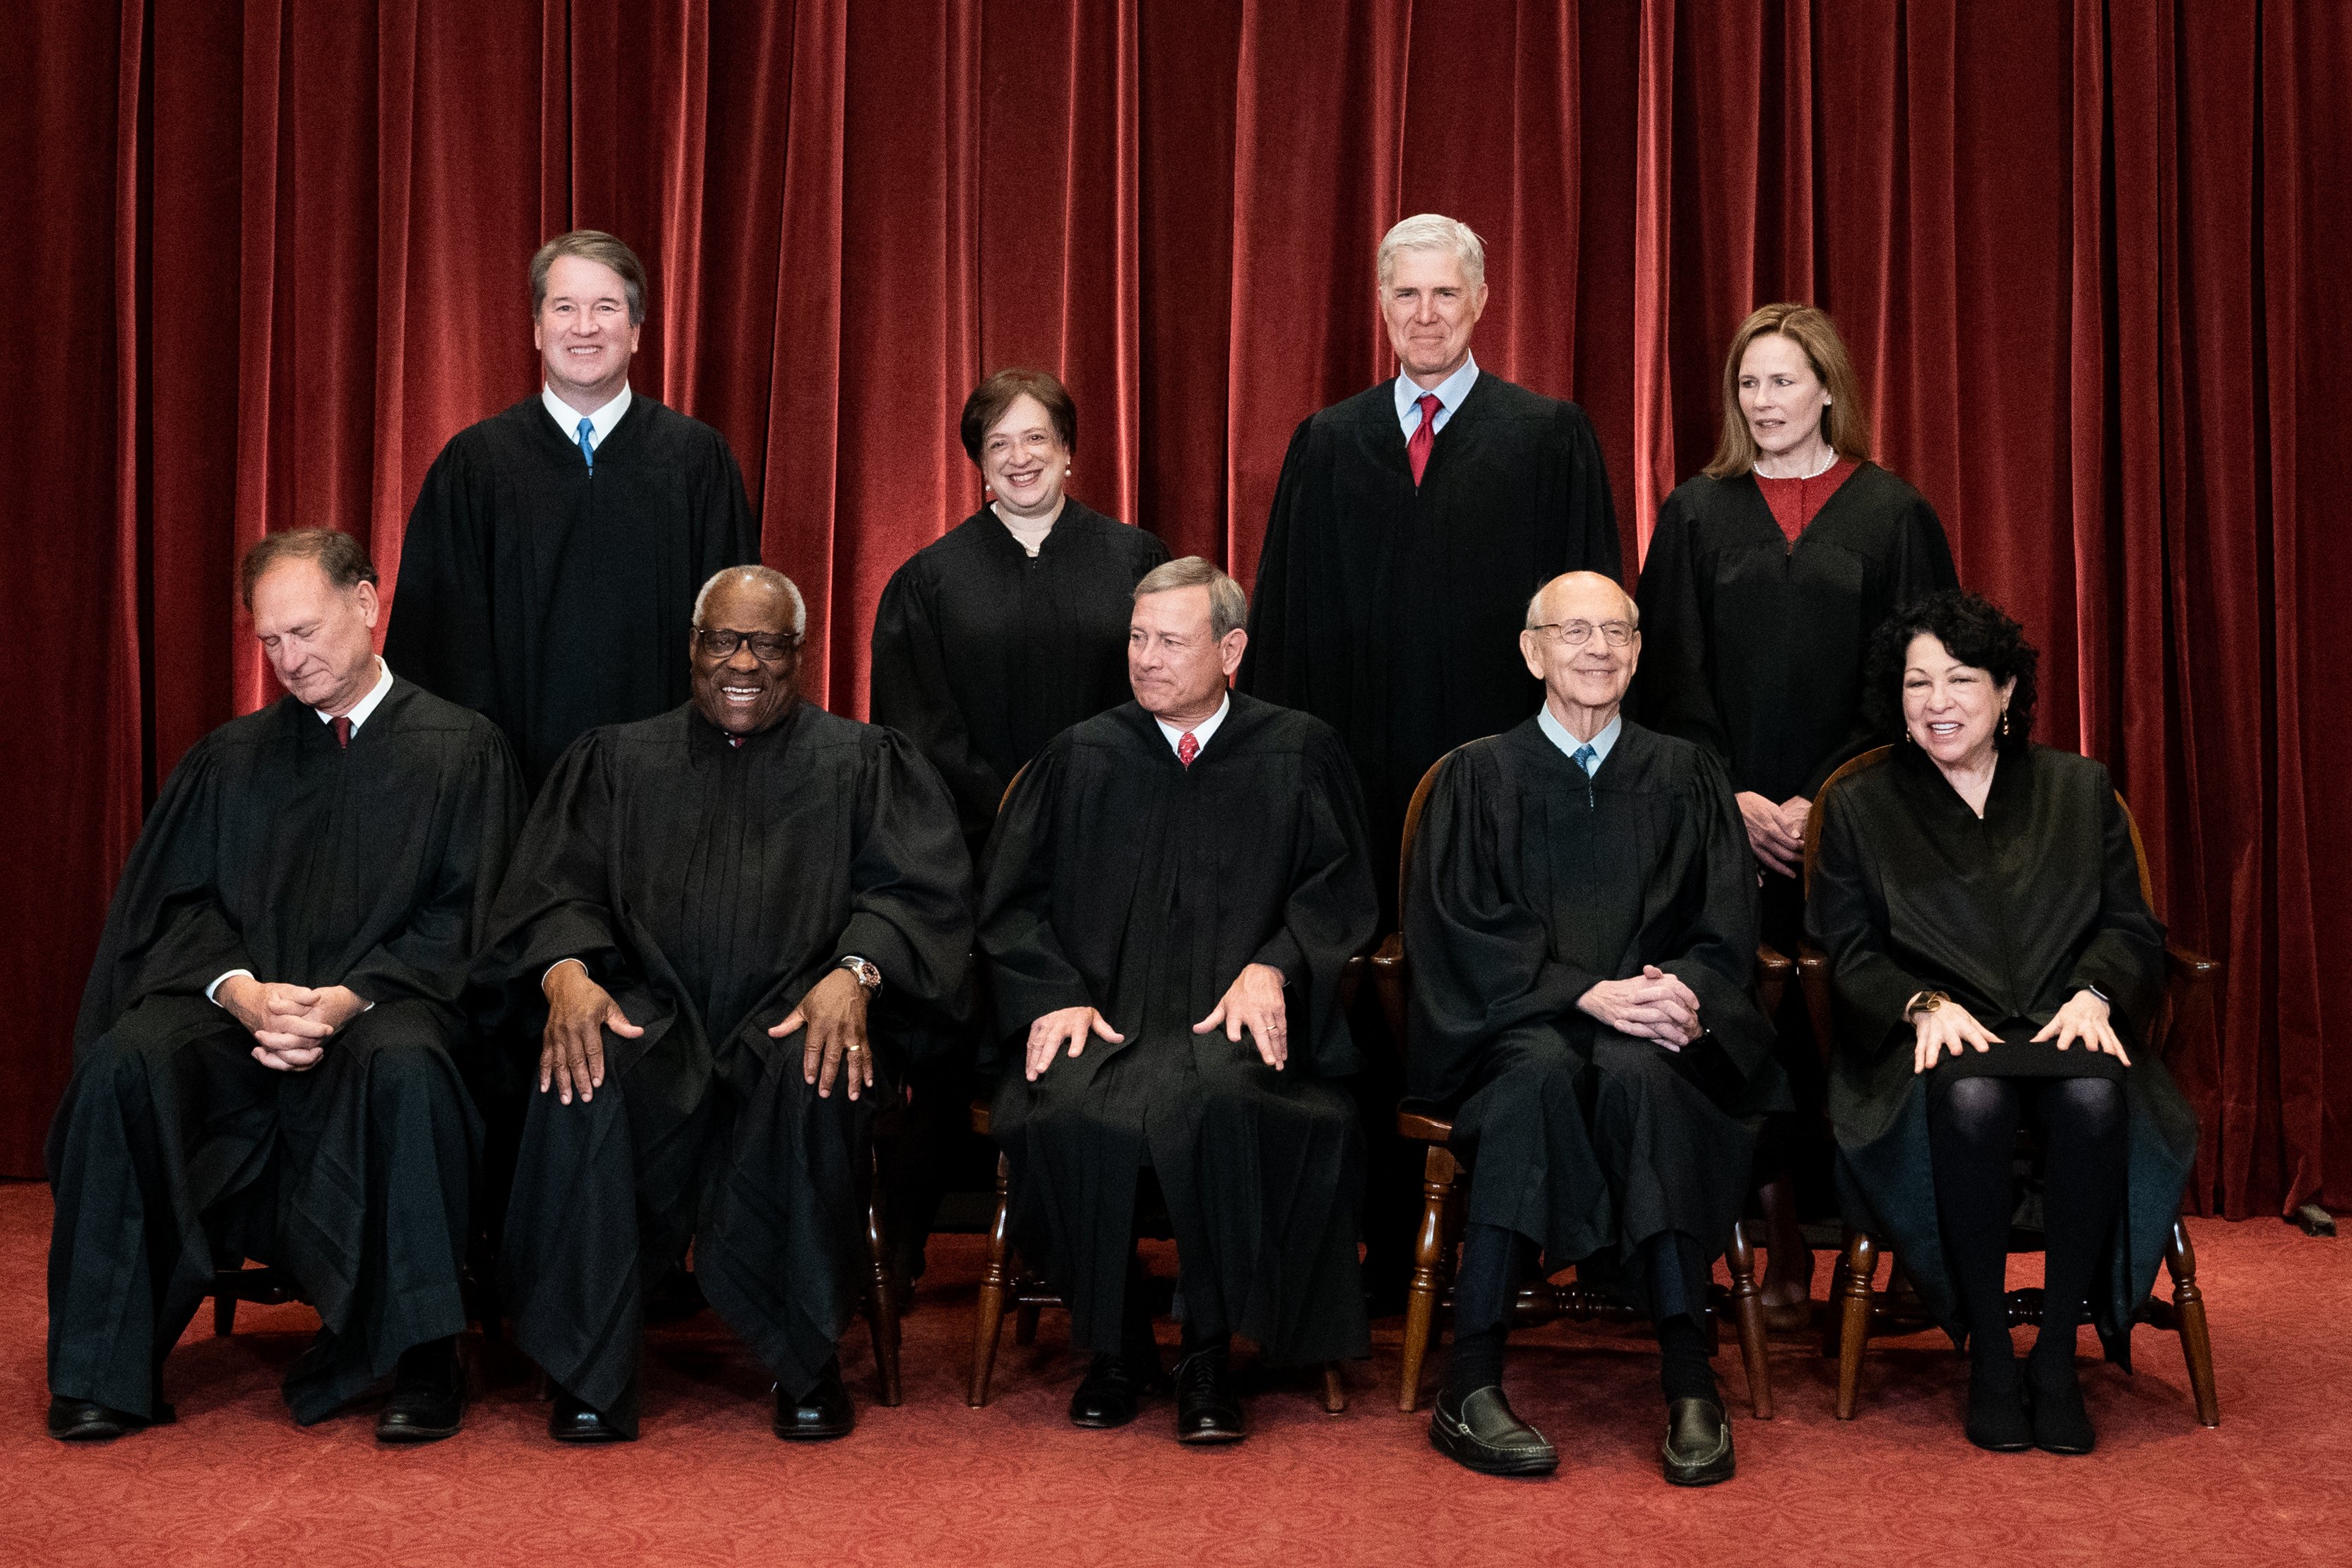 Members of the Supreme Court pose for a group photo at the Supreme Court in Washington, DC | Source: Getty Images